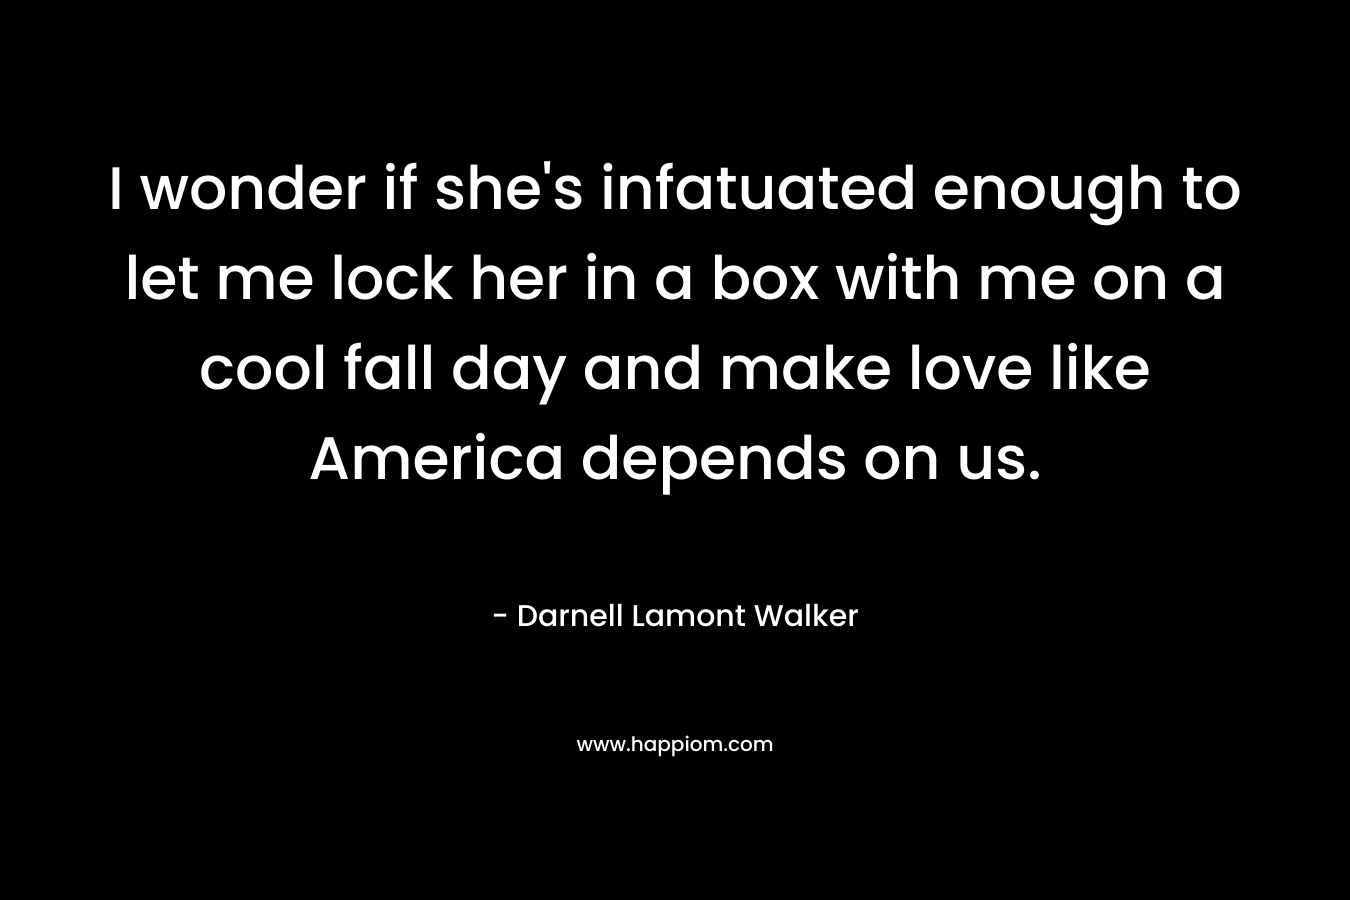 I wonder if she's infatuated enough to let me lock her in a box with me on a cool fall day and make love like America depends on us.